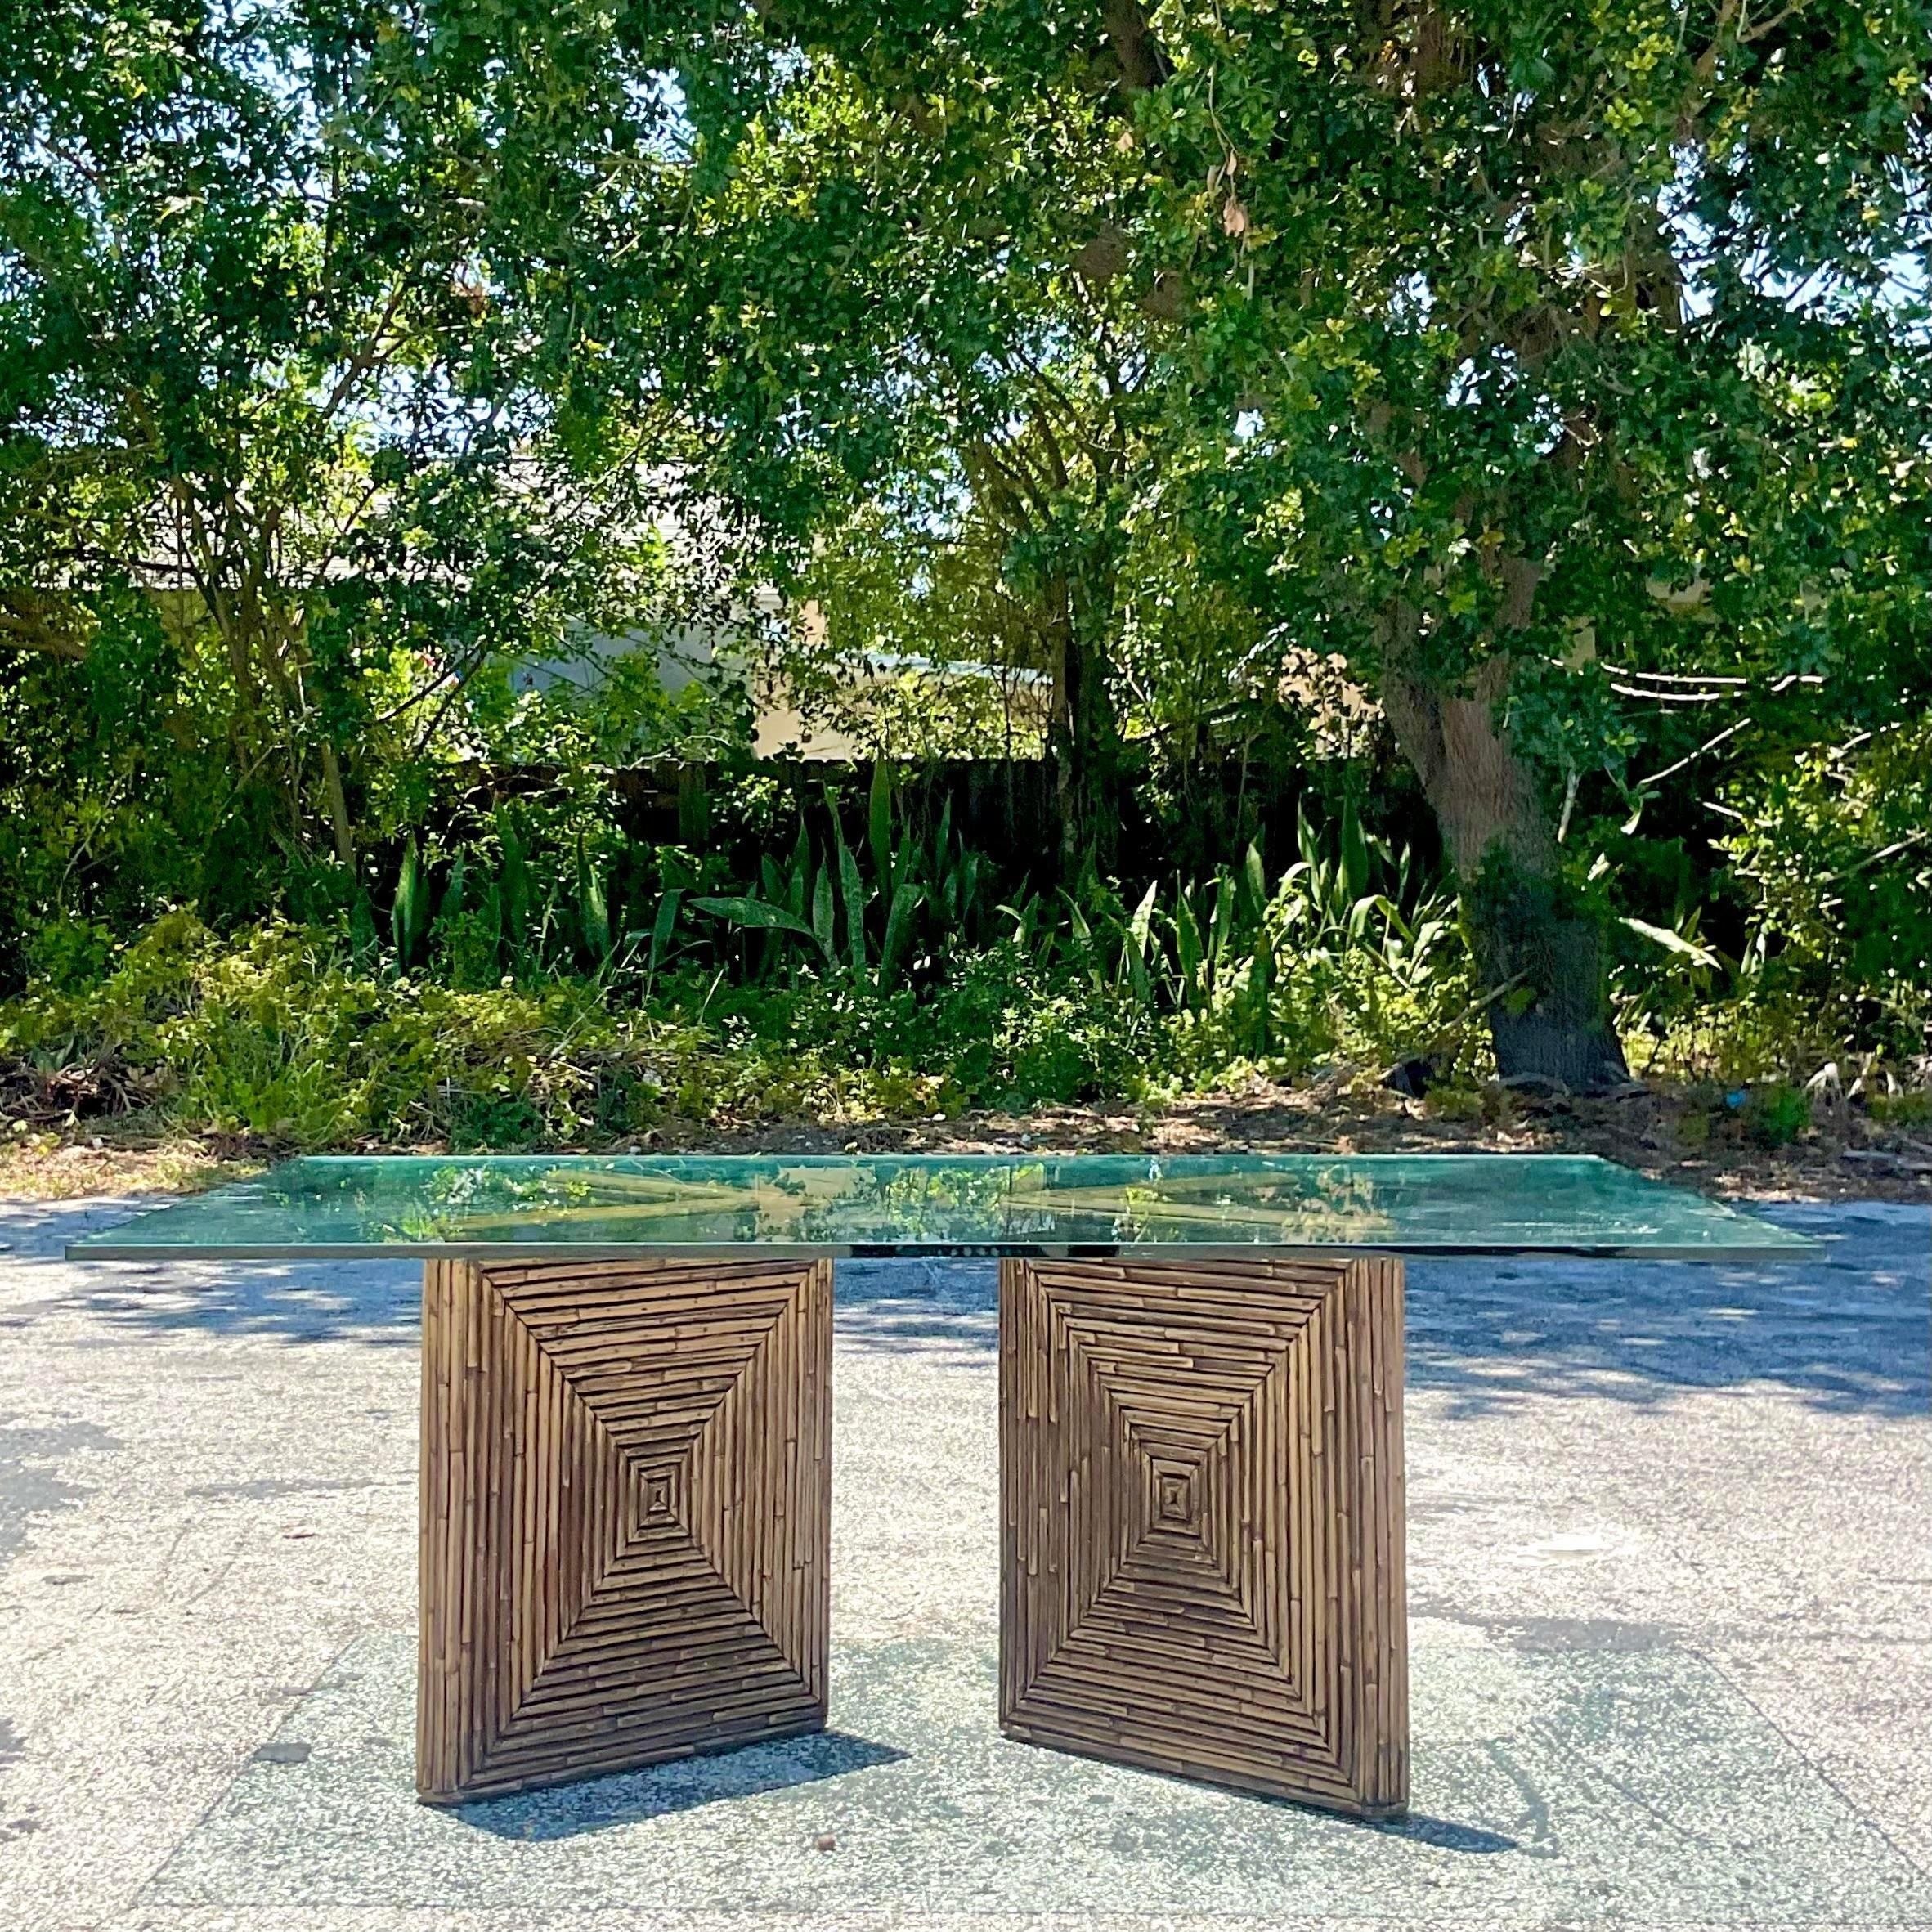 Philippine Late 20th Century Vintage Coastal Pencil Reed Coffee Table Pedestals - a Pair For Sale